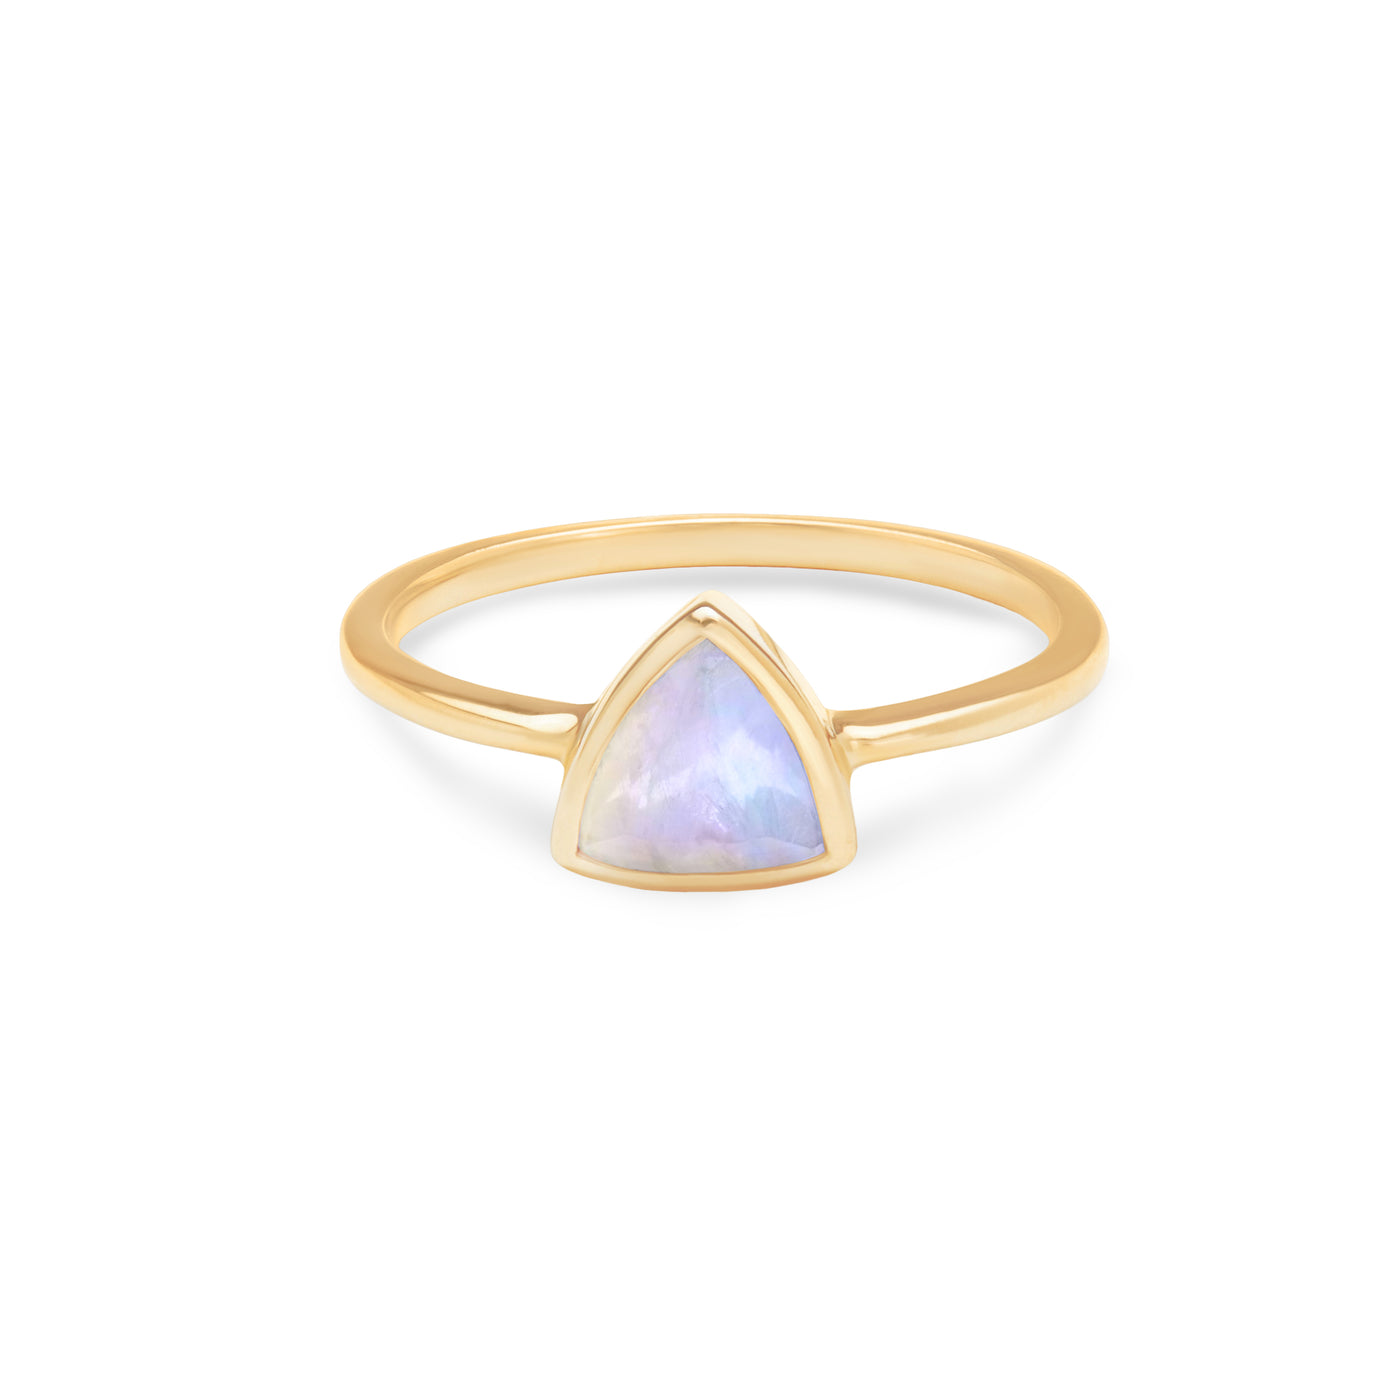 14k Yellow Gold Ring with Moonstone in Triangle Shape laying Flat on White Background